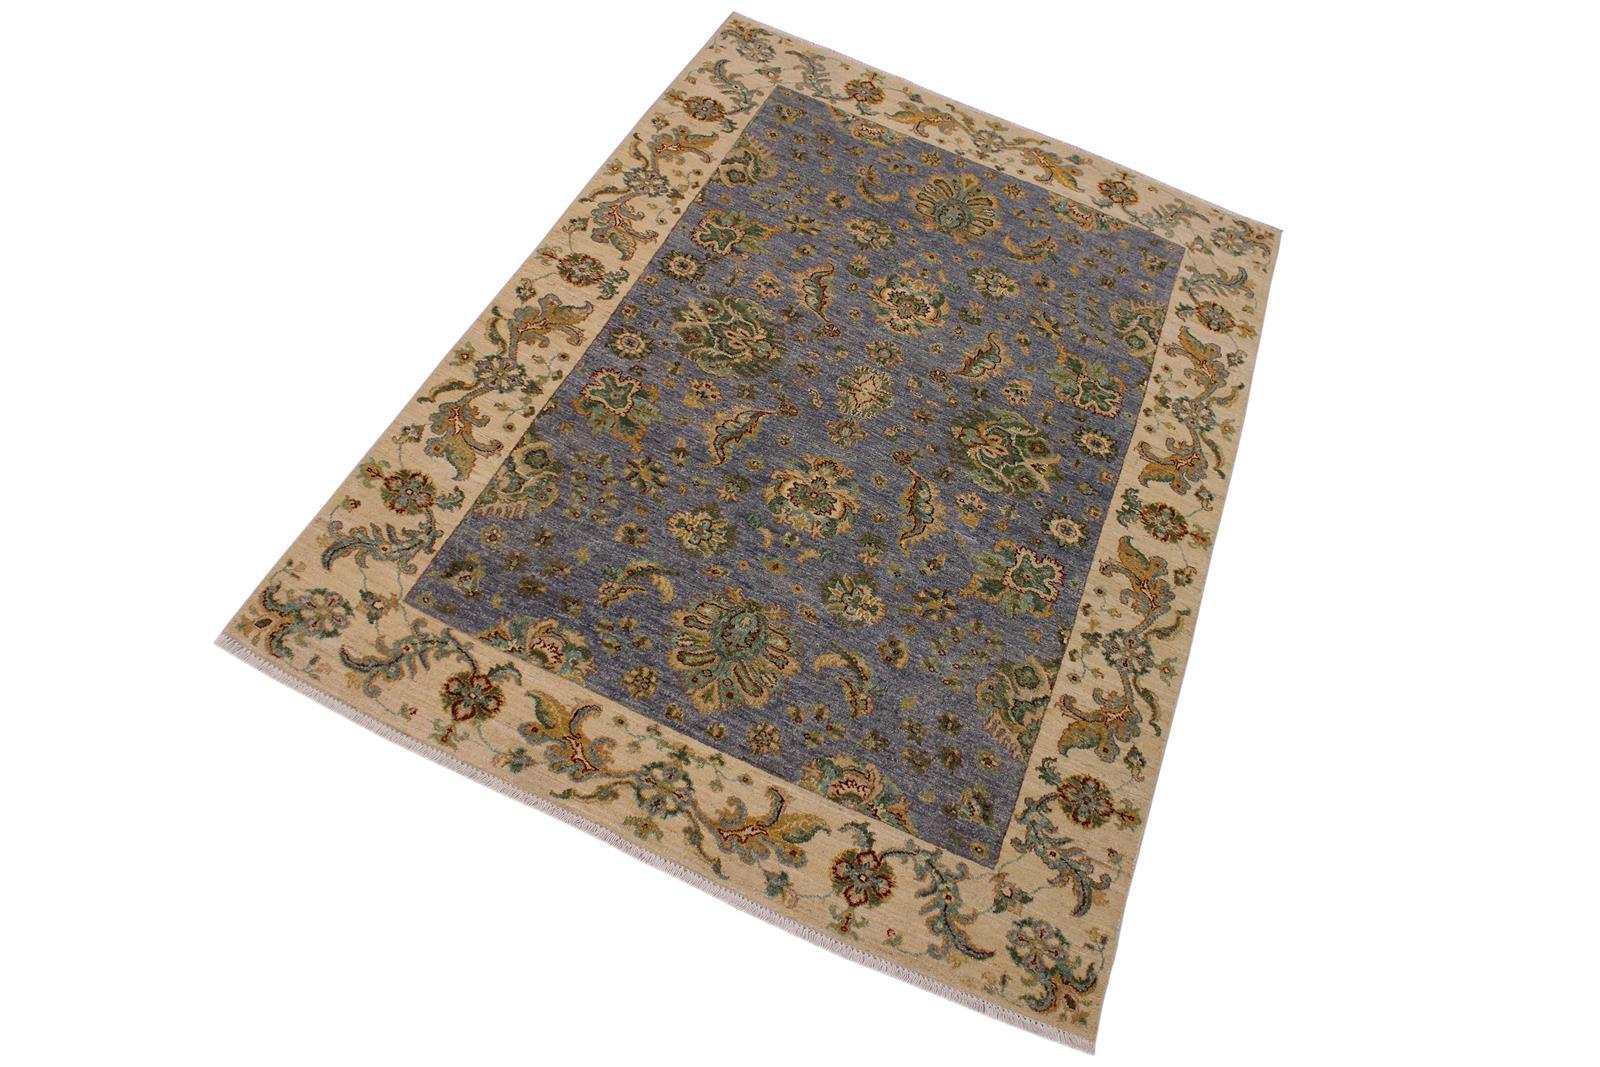 A11779, 5 6"x 7 8",Traditional                   ,6x8,Grey,IVORY,Hand-knotted                  ,Pakistan   ,100% Wool  ,Rectangle  ,652671215216